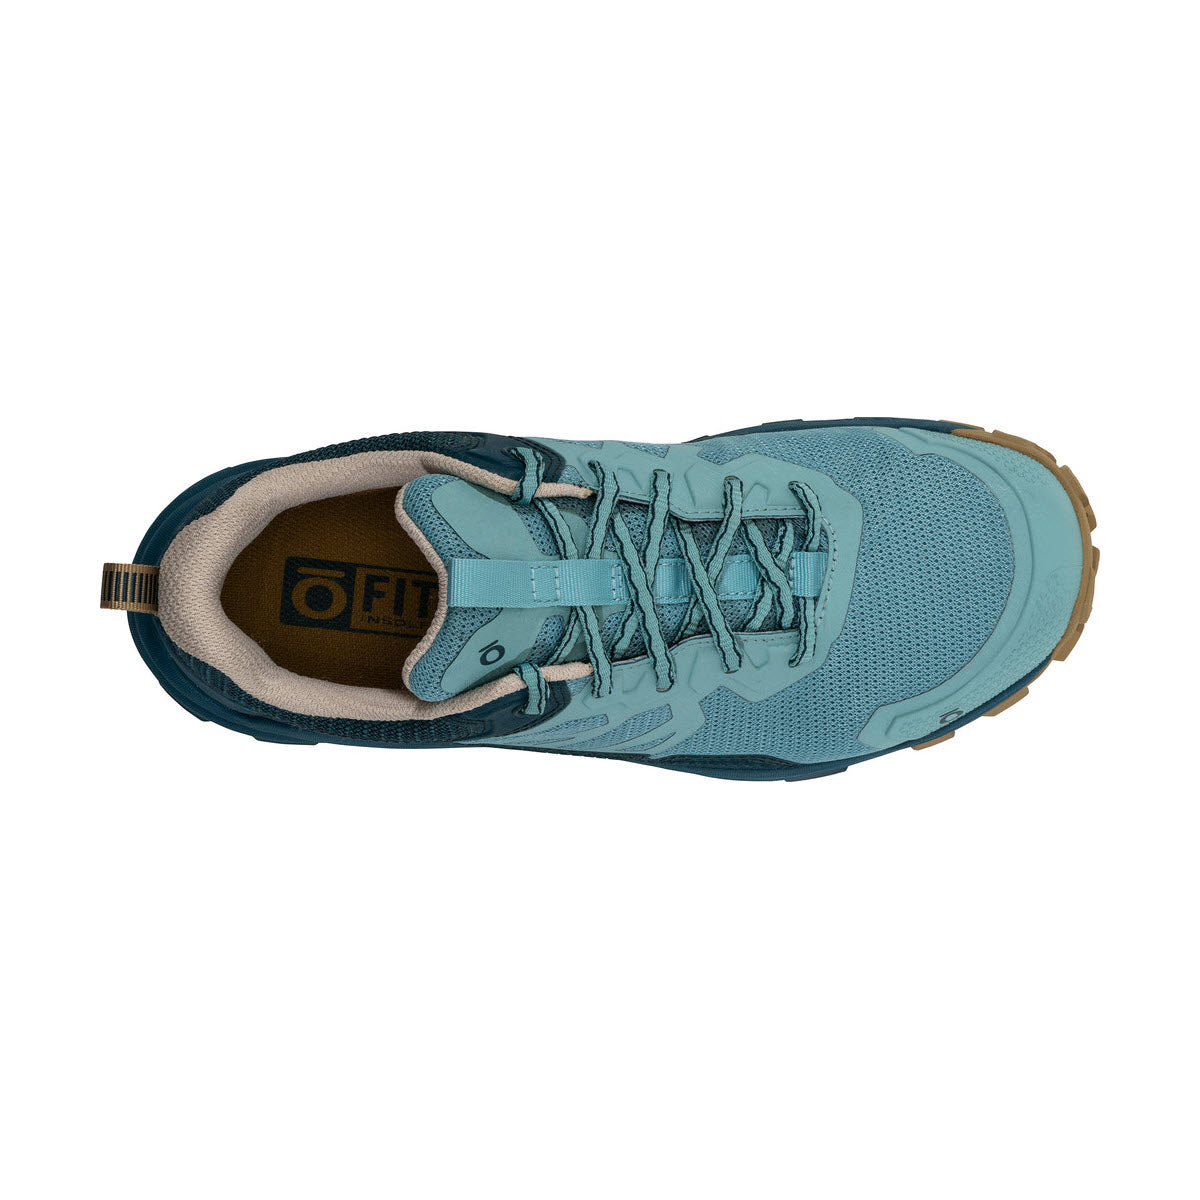 Top view of a single light blue Oboz Katabatic Low Dark Island trail running shoe with laces, featuring a logo on the insole.